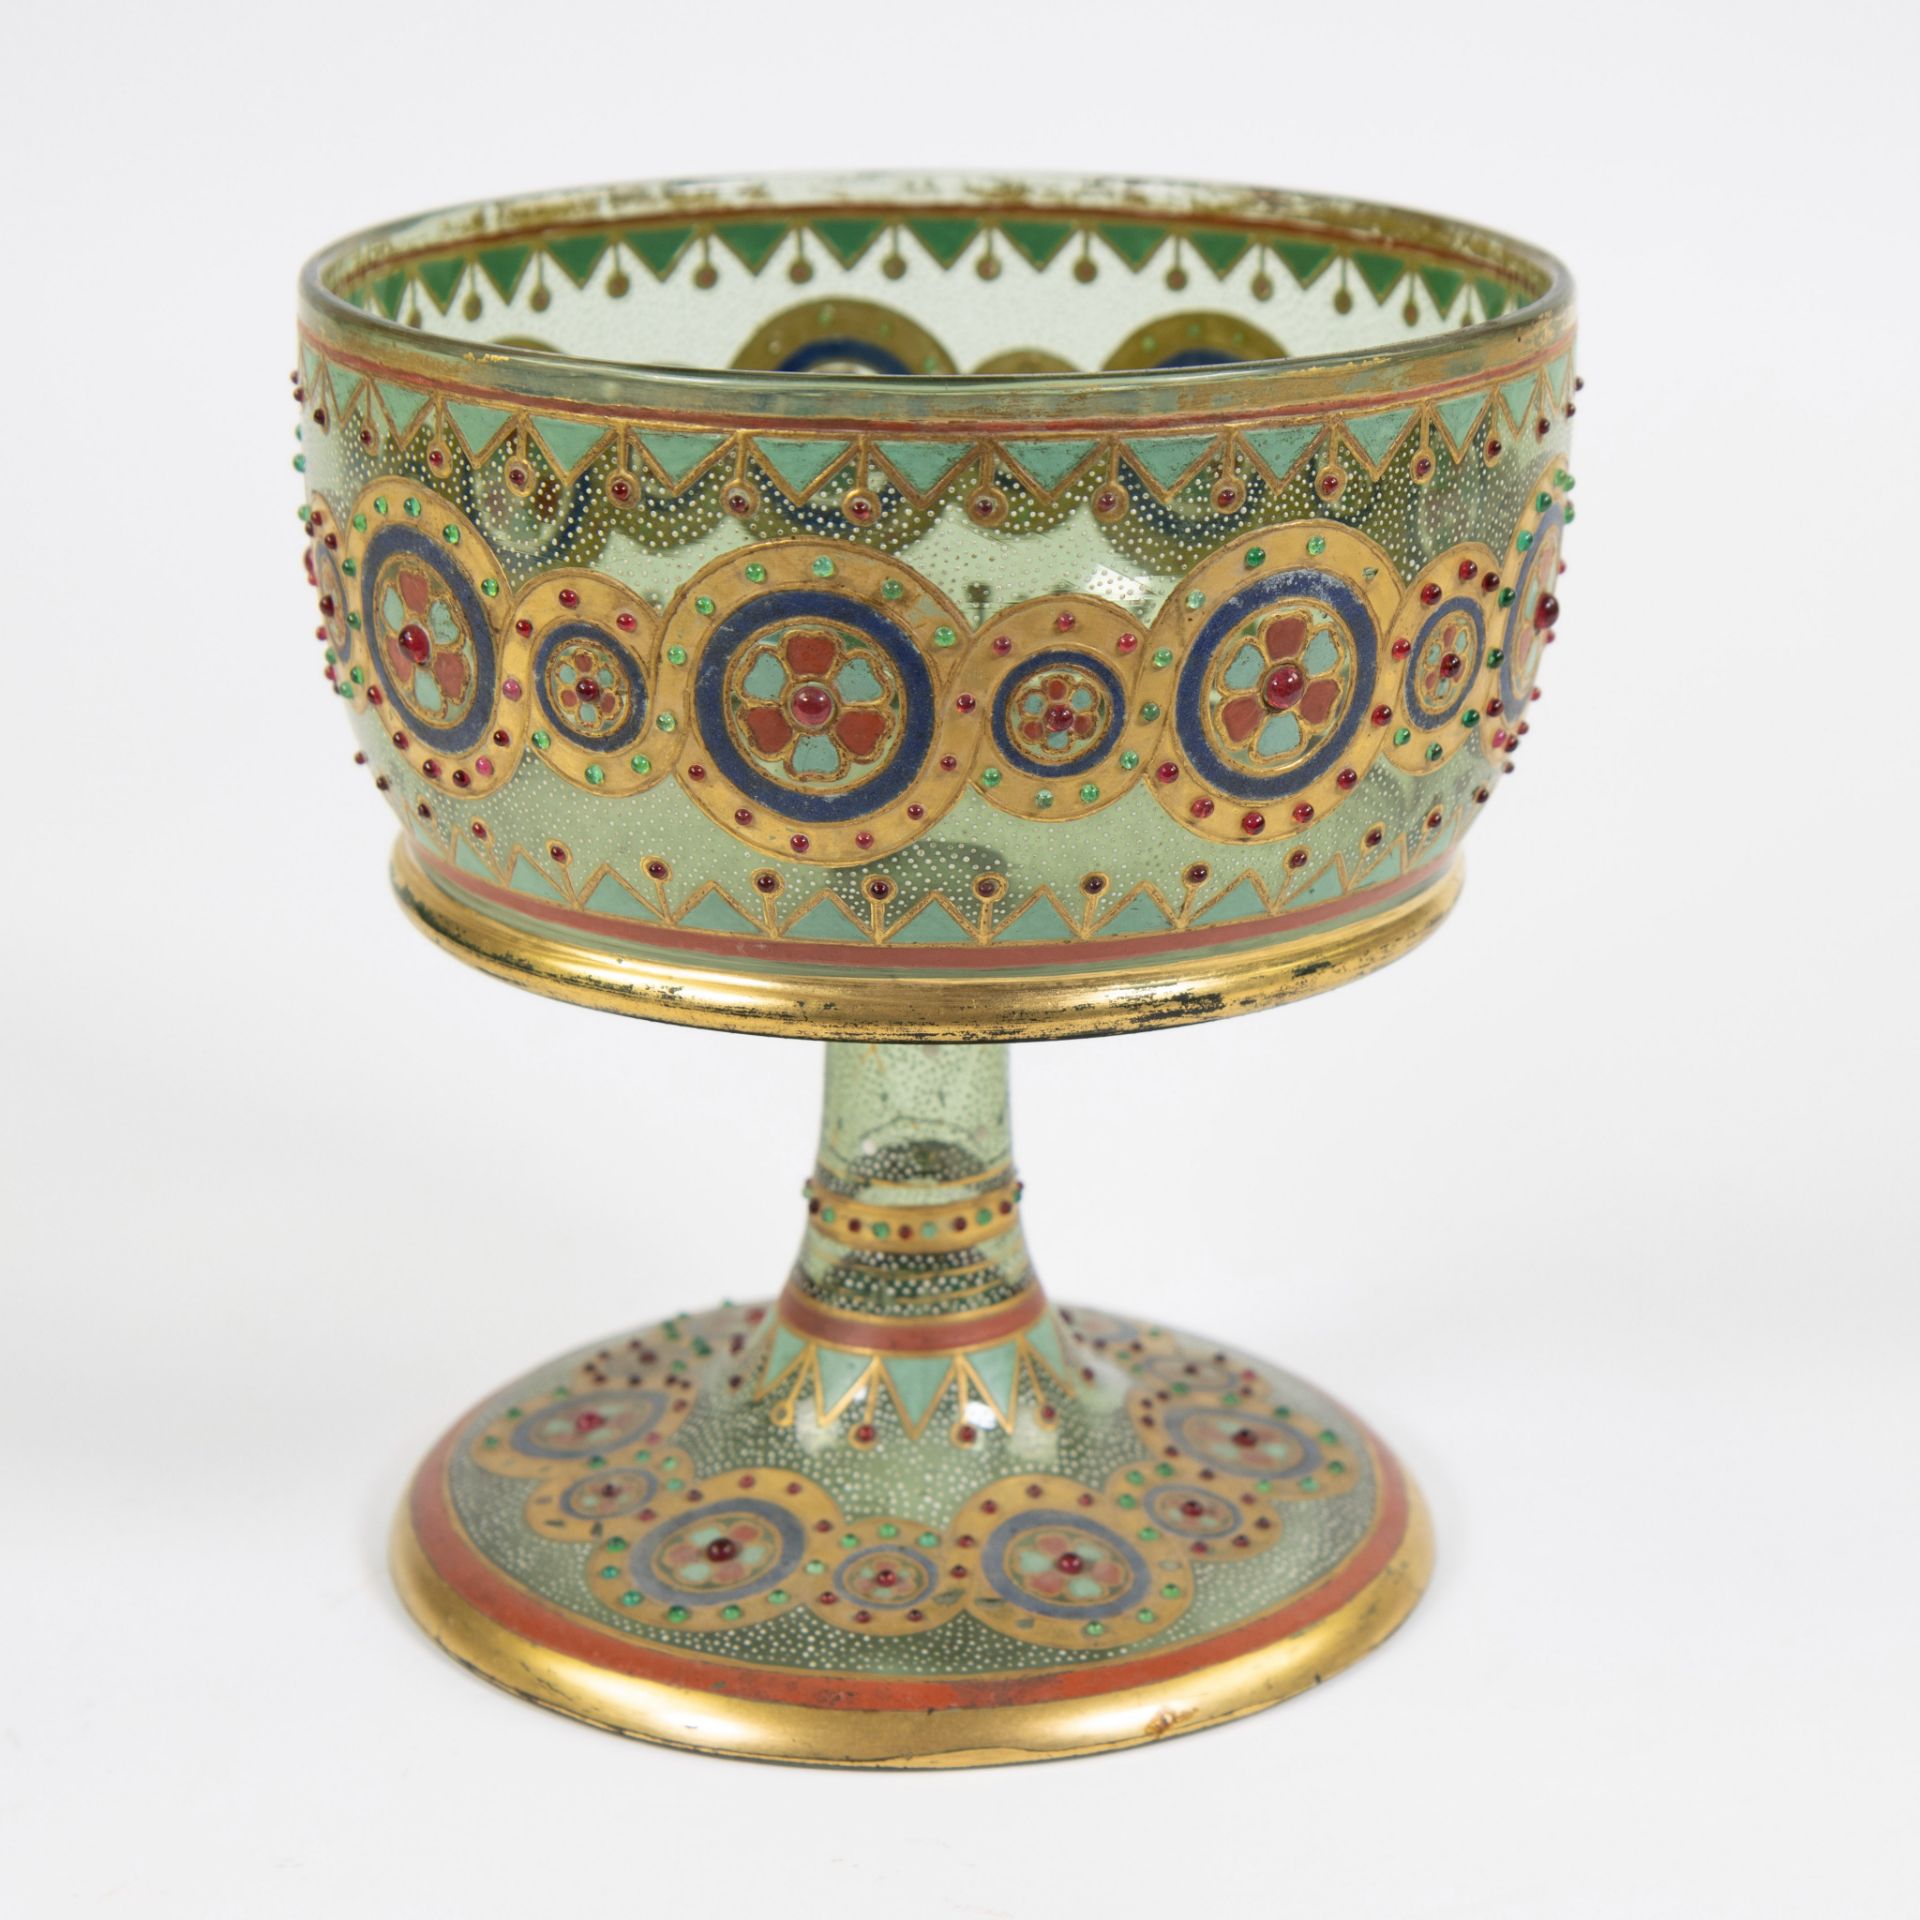 19th century Venetian glass coupe hand-painted and enamelled - Image 4 of 6